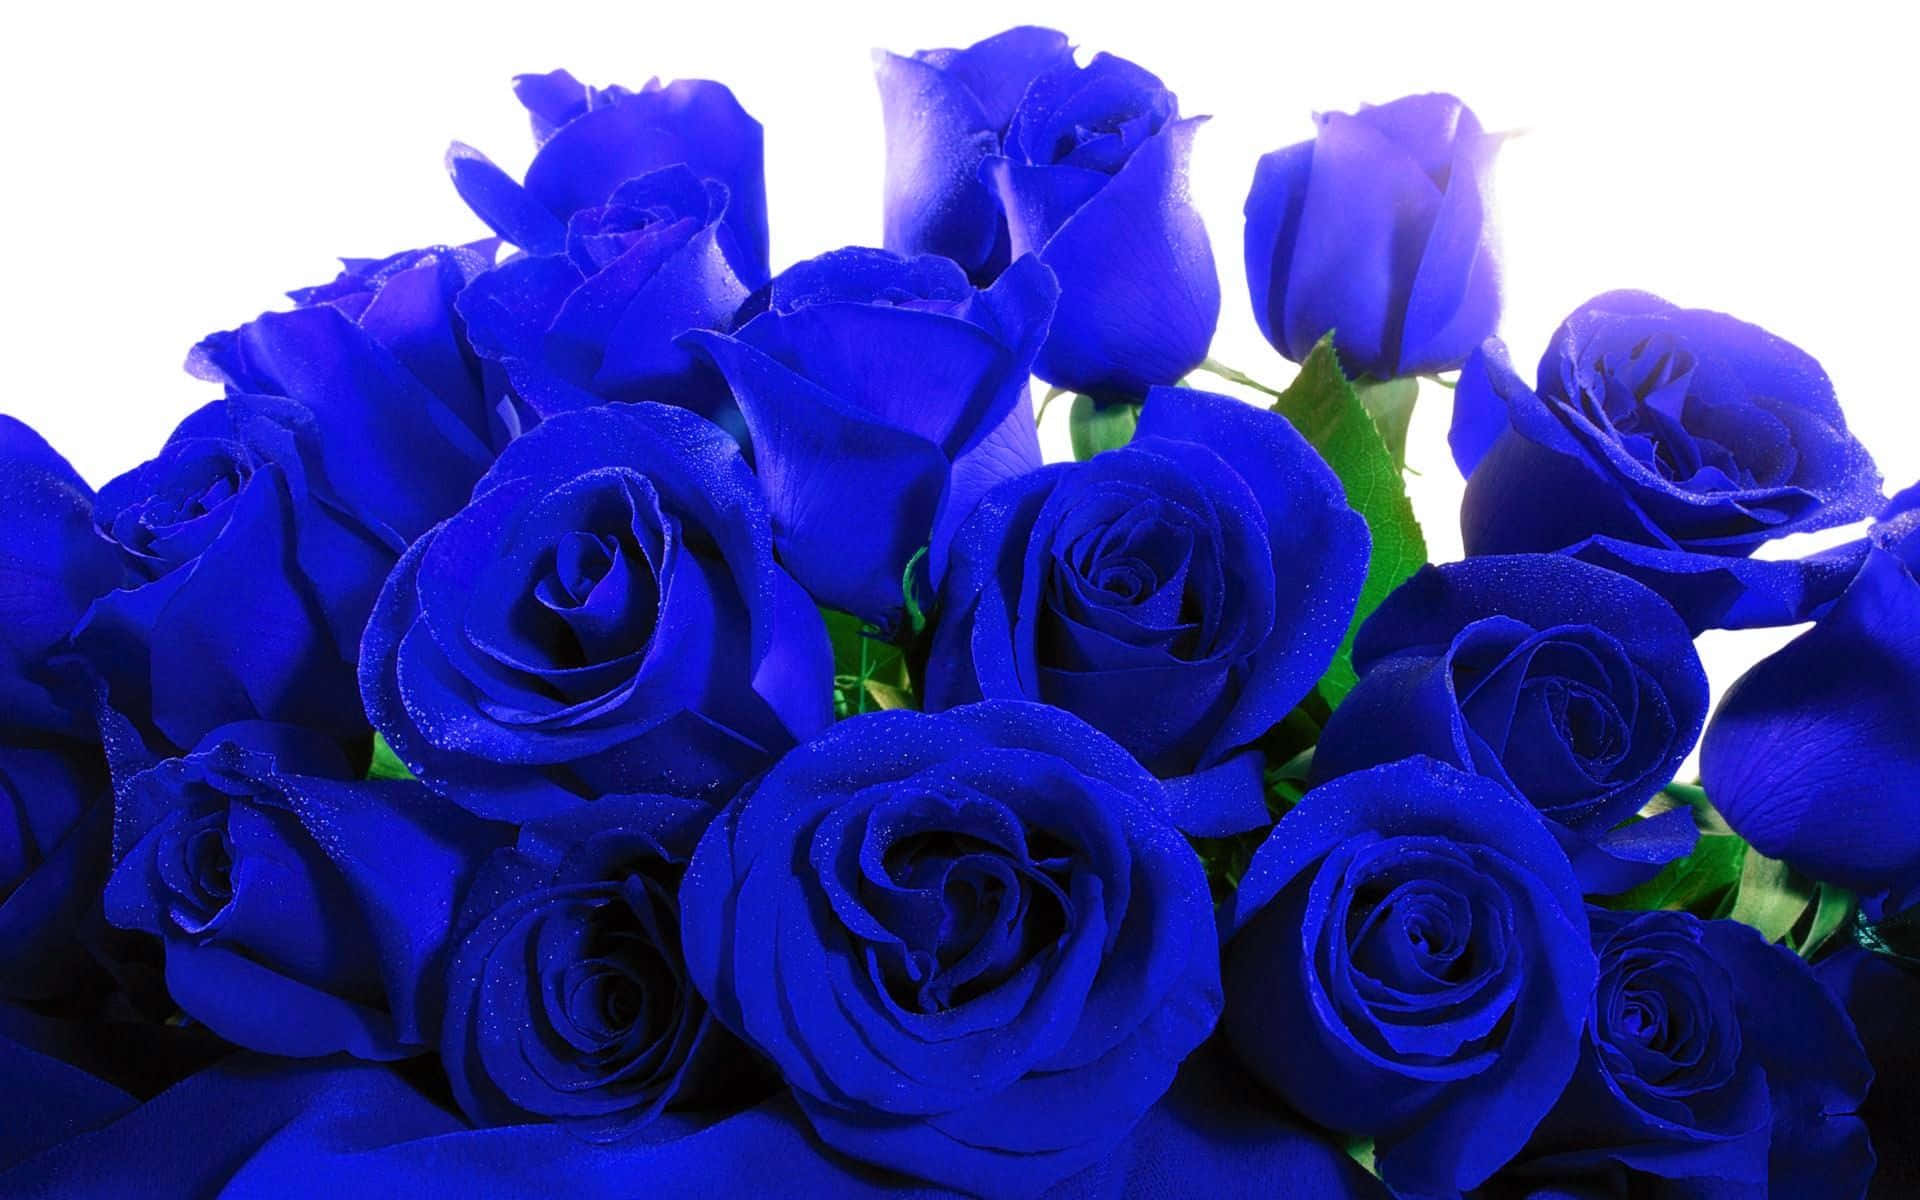 A Gorgeous Blue Rose Standing Vibrant In Front Of A Blurred Background.